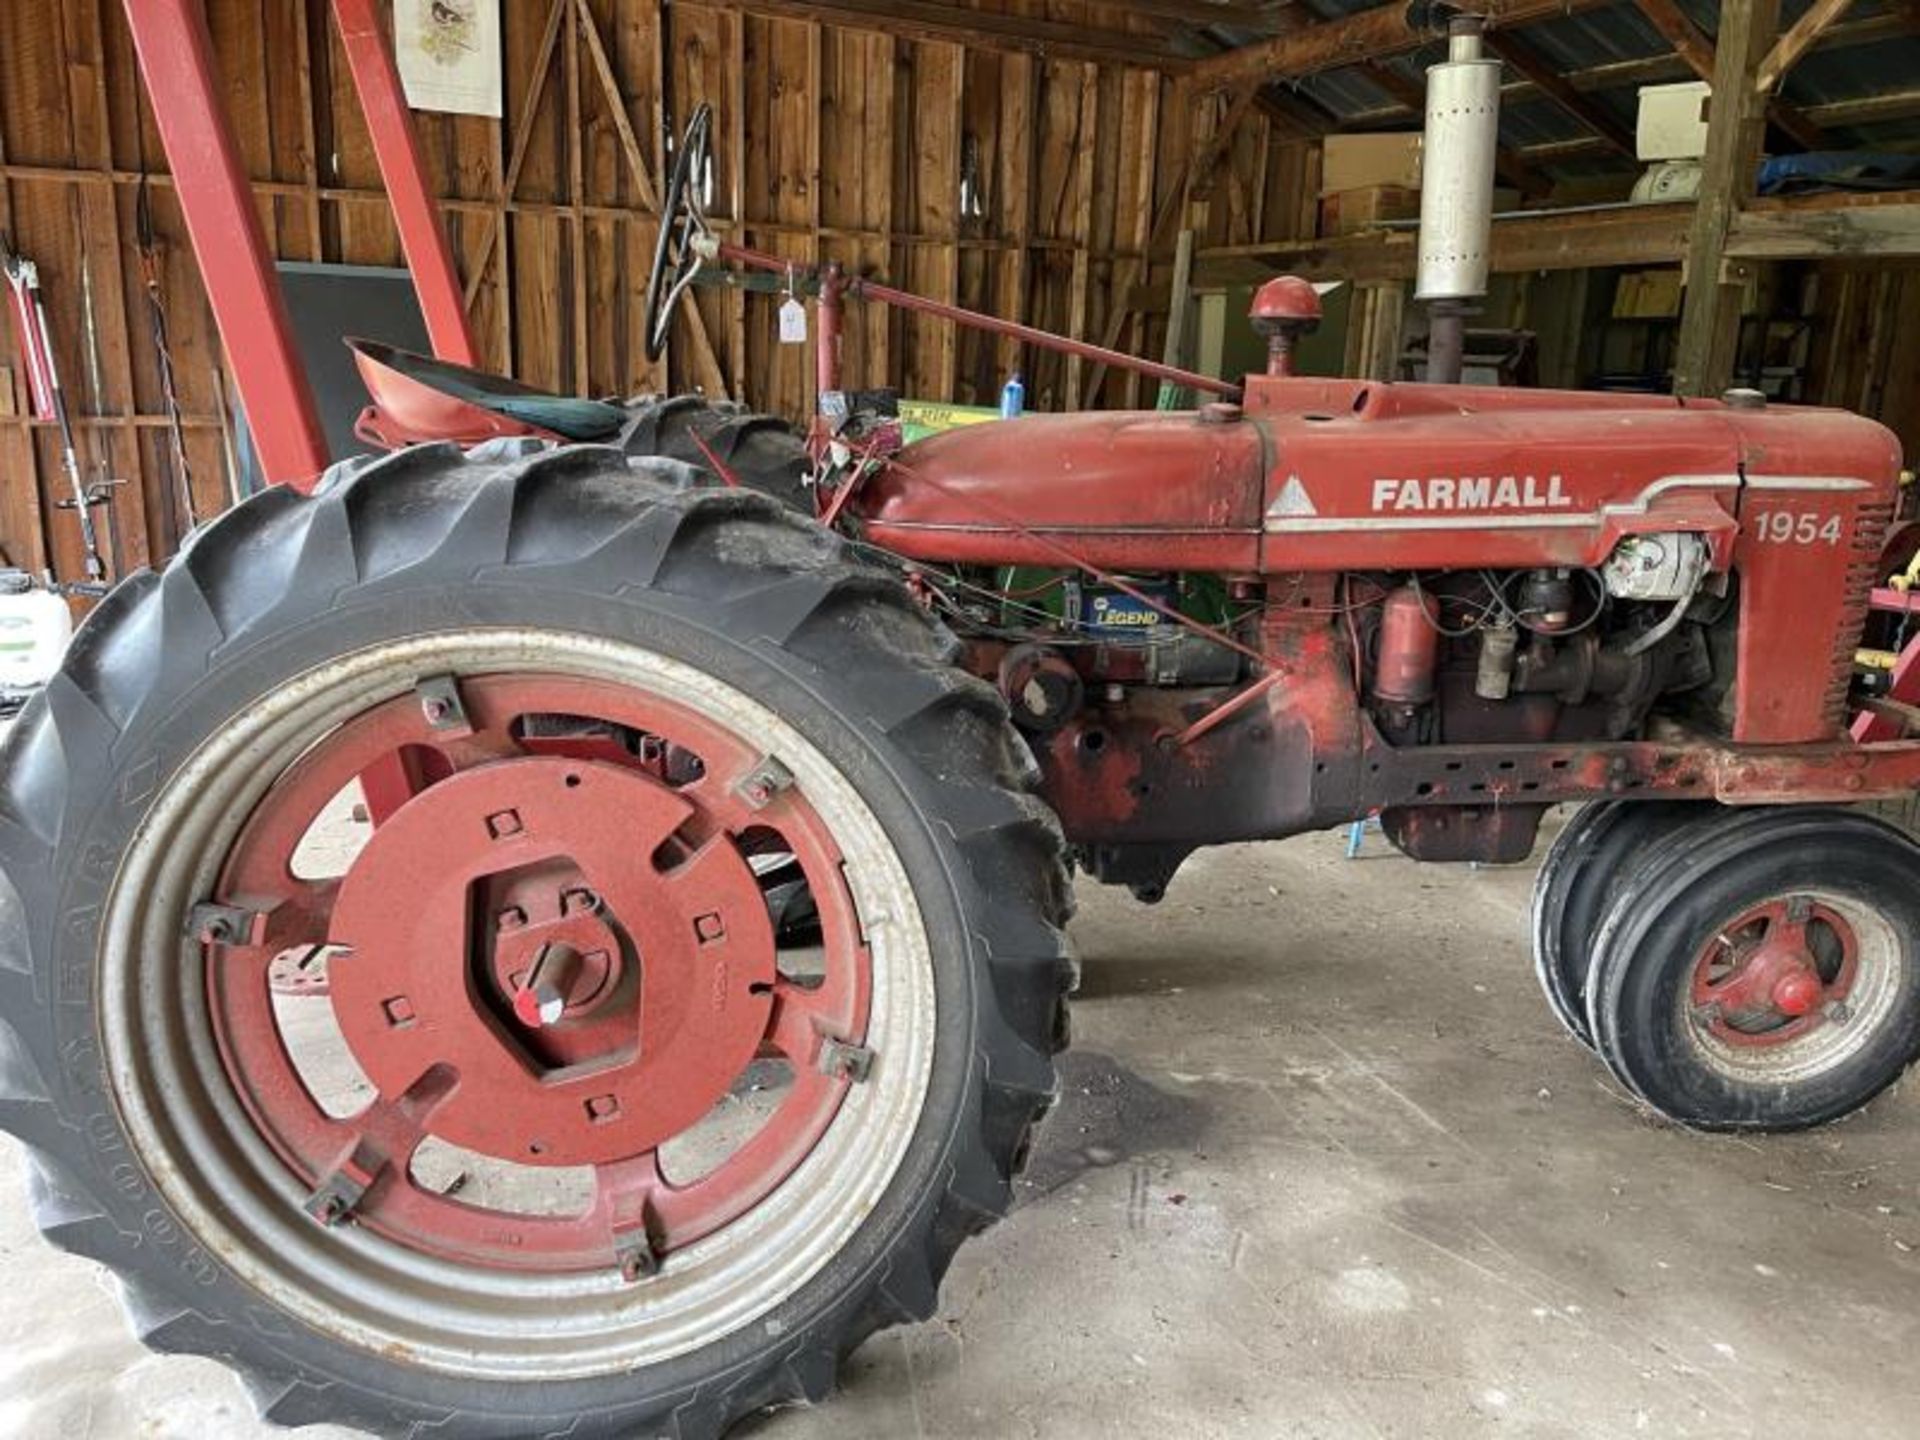 Farmall Tractor Believed To Be 1954, Row-CropFarmall Tractor Believed To Be 1954, Row-Crop